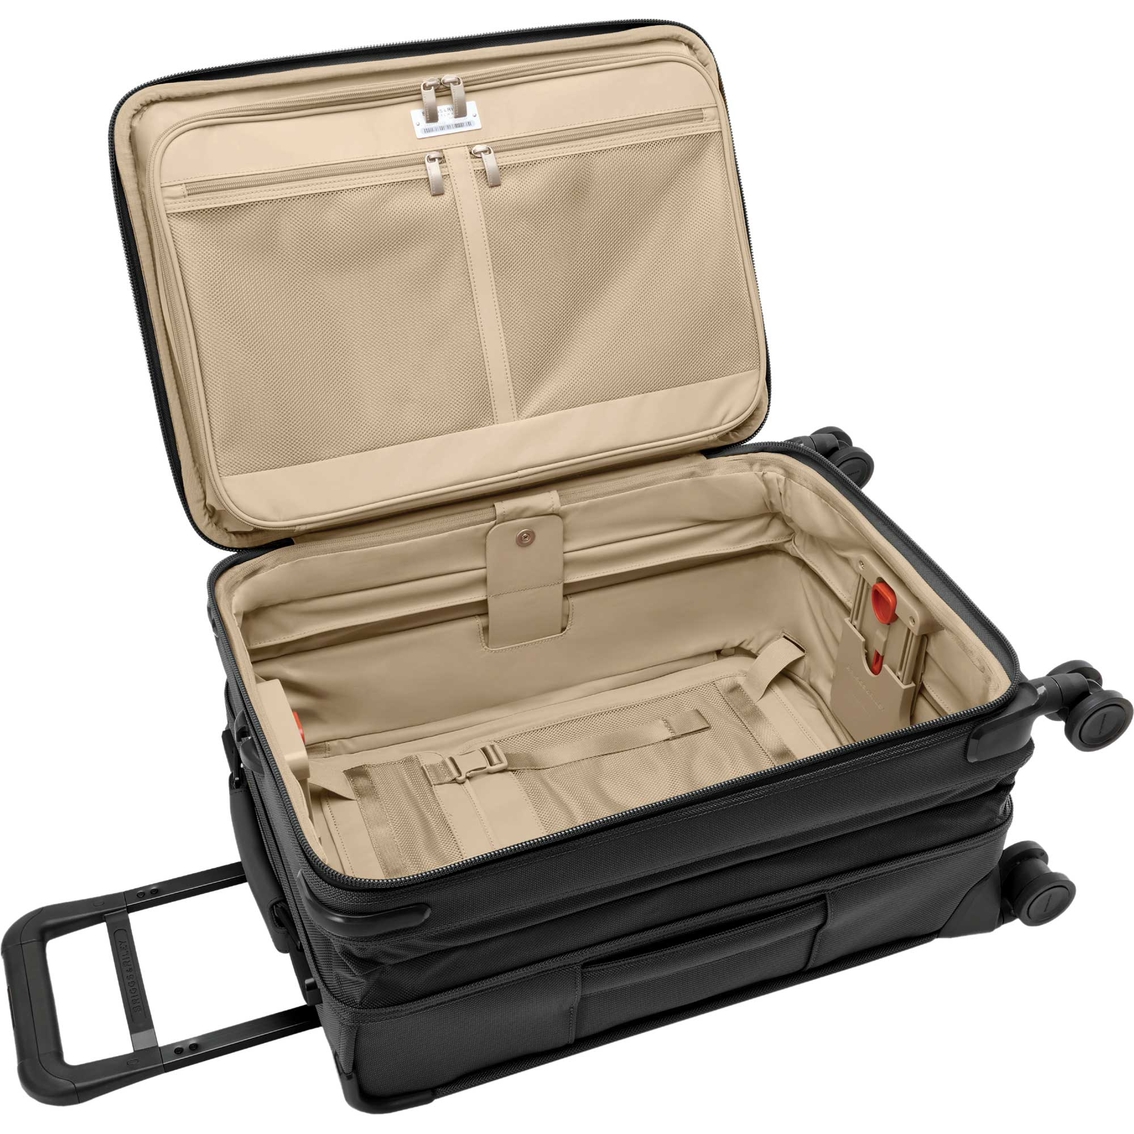 Briggs & Riley Baseline Essential Carry On Spinner - Image 7 of 10